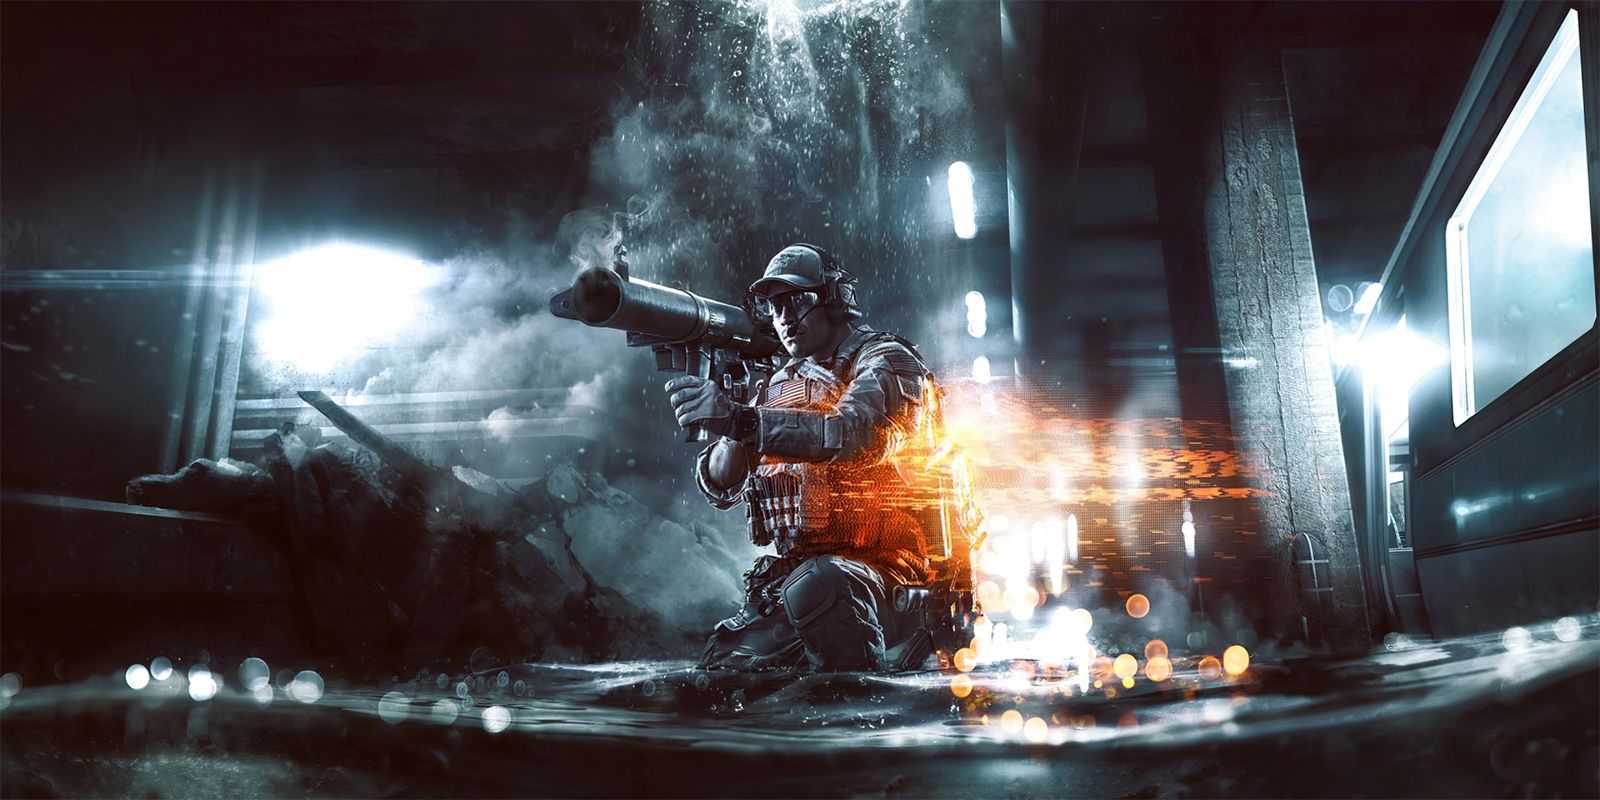 Prime Gaming adds Battlefield 3 for free and a tonne of